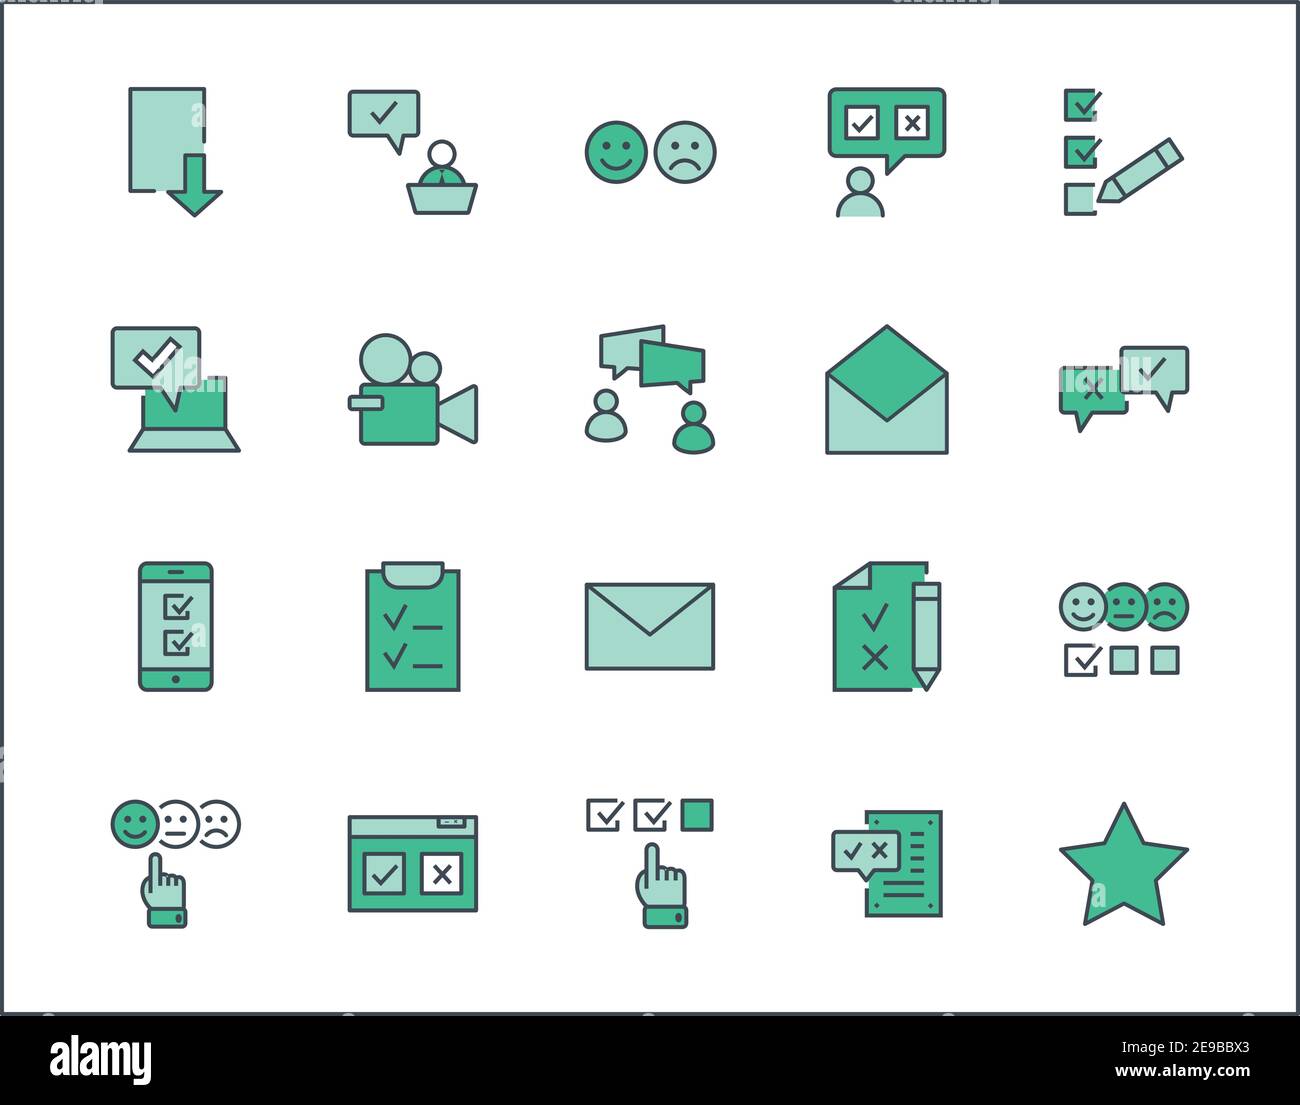 Set of Survey Related Vector Line Icons. Contains such Icons as Smile, Sad, Review, Click, Check, Customer Opinion, Web Survey and more. Editable Stock Vector